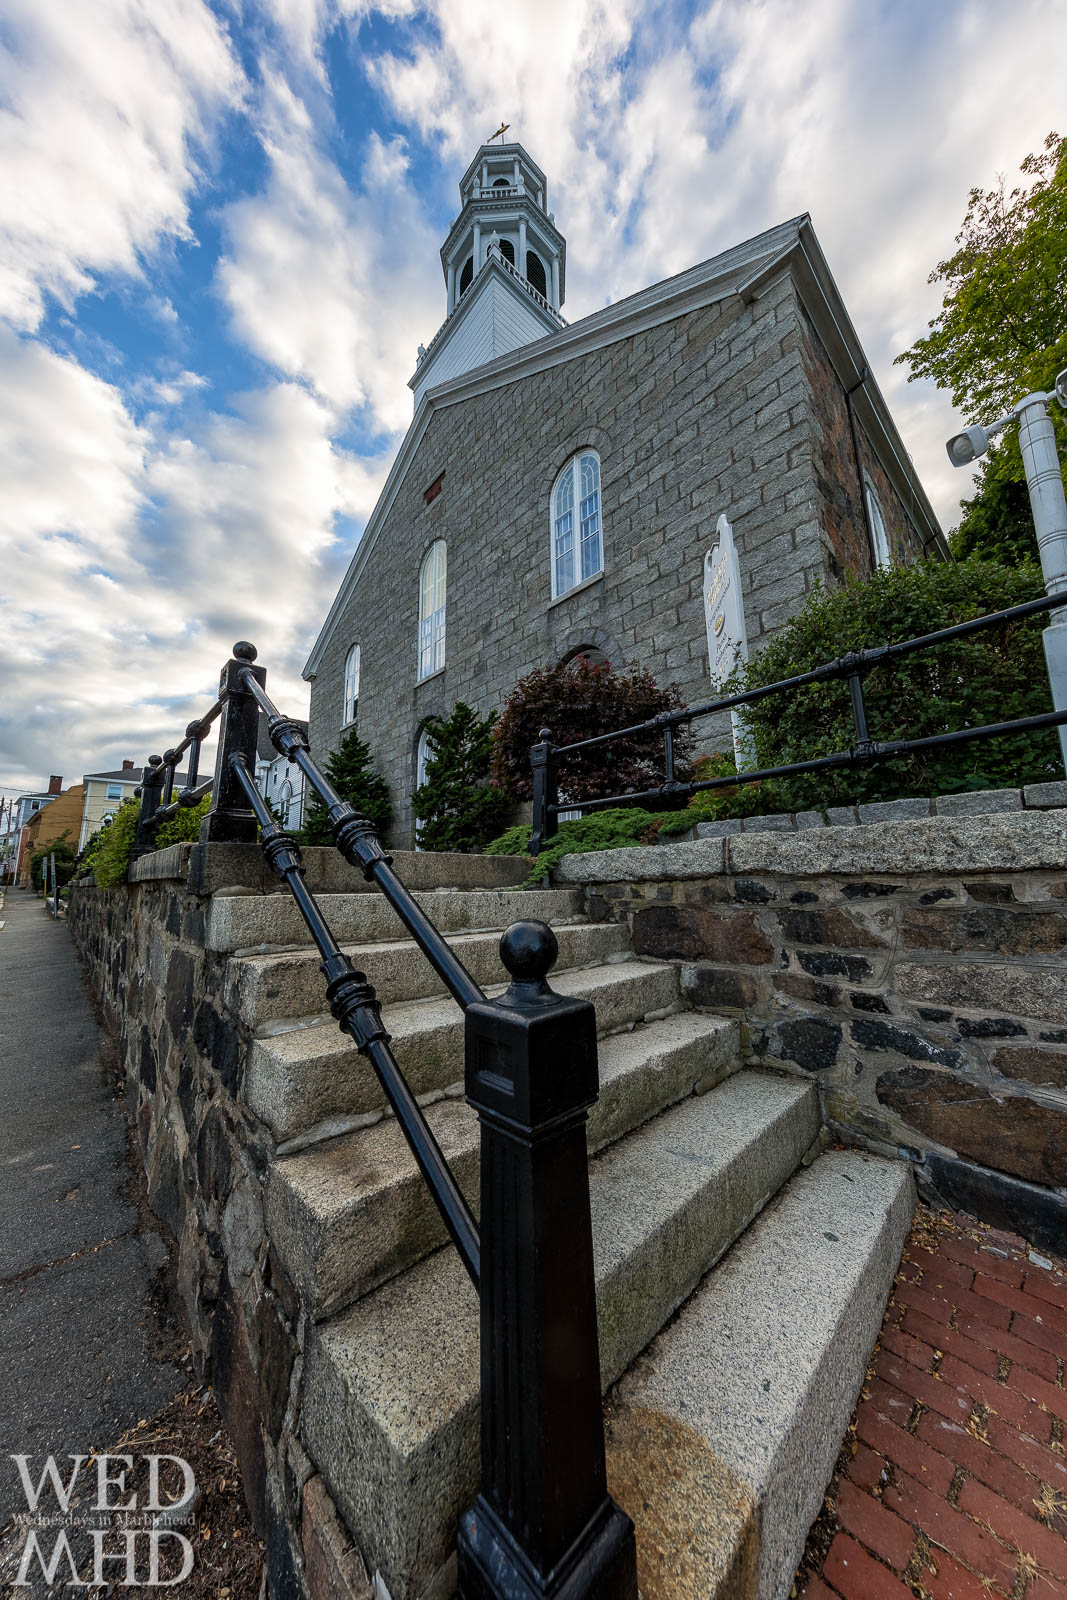 At the foot of the stairs of Old North Church in Marblehead